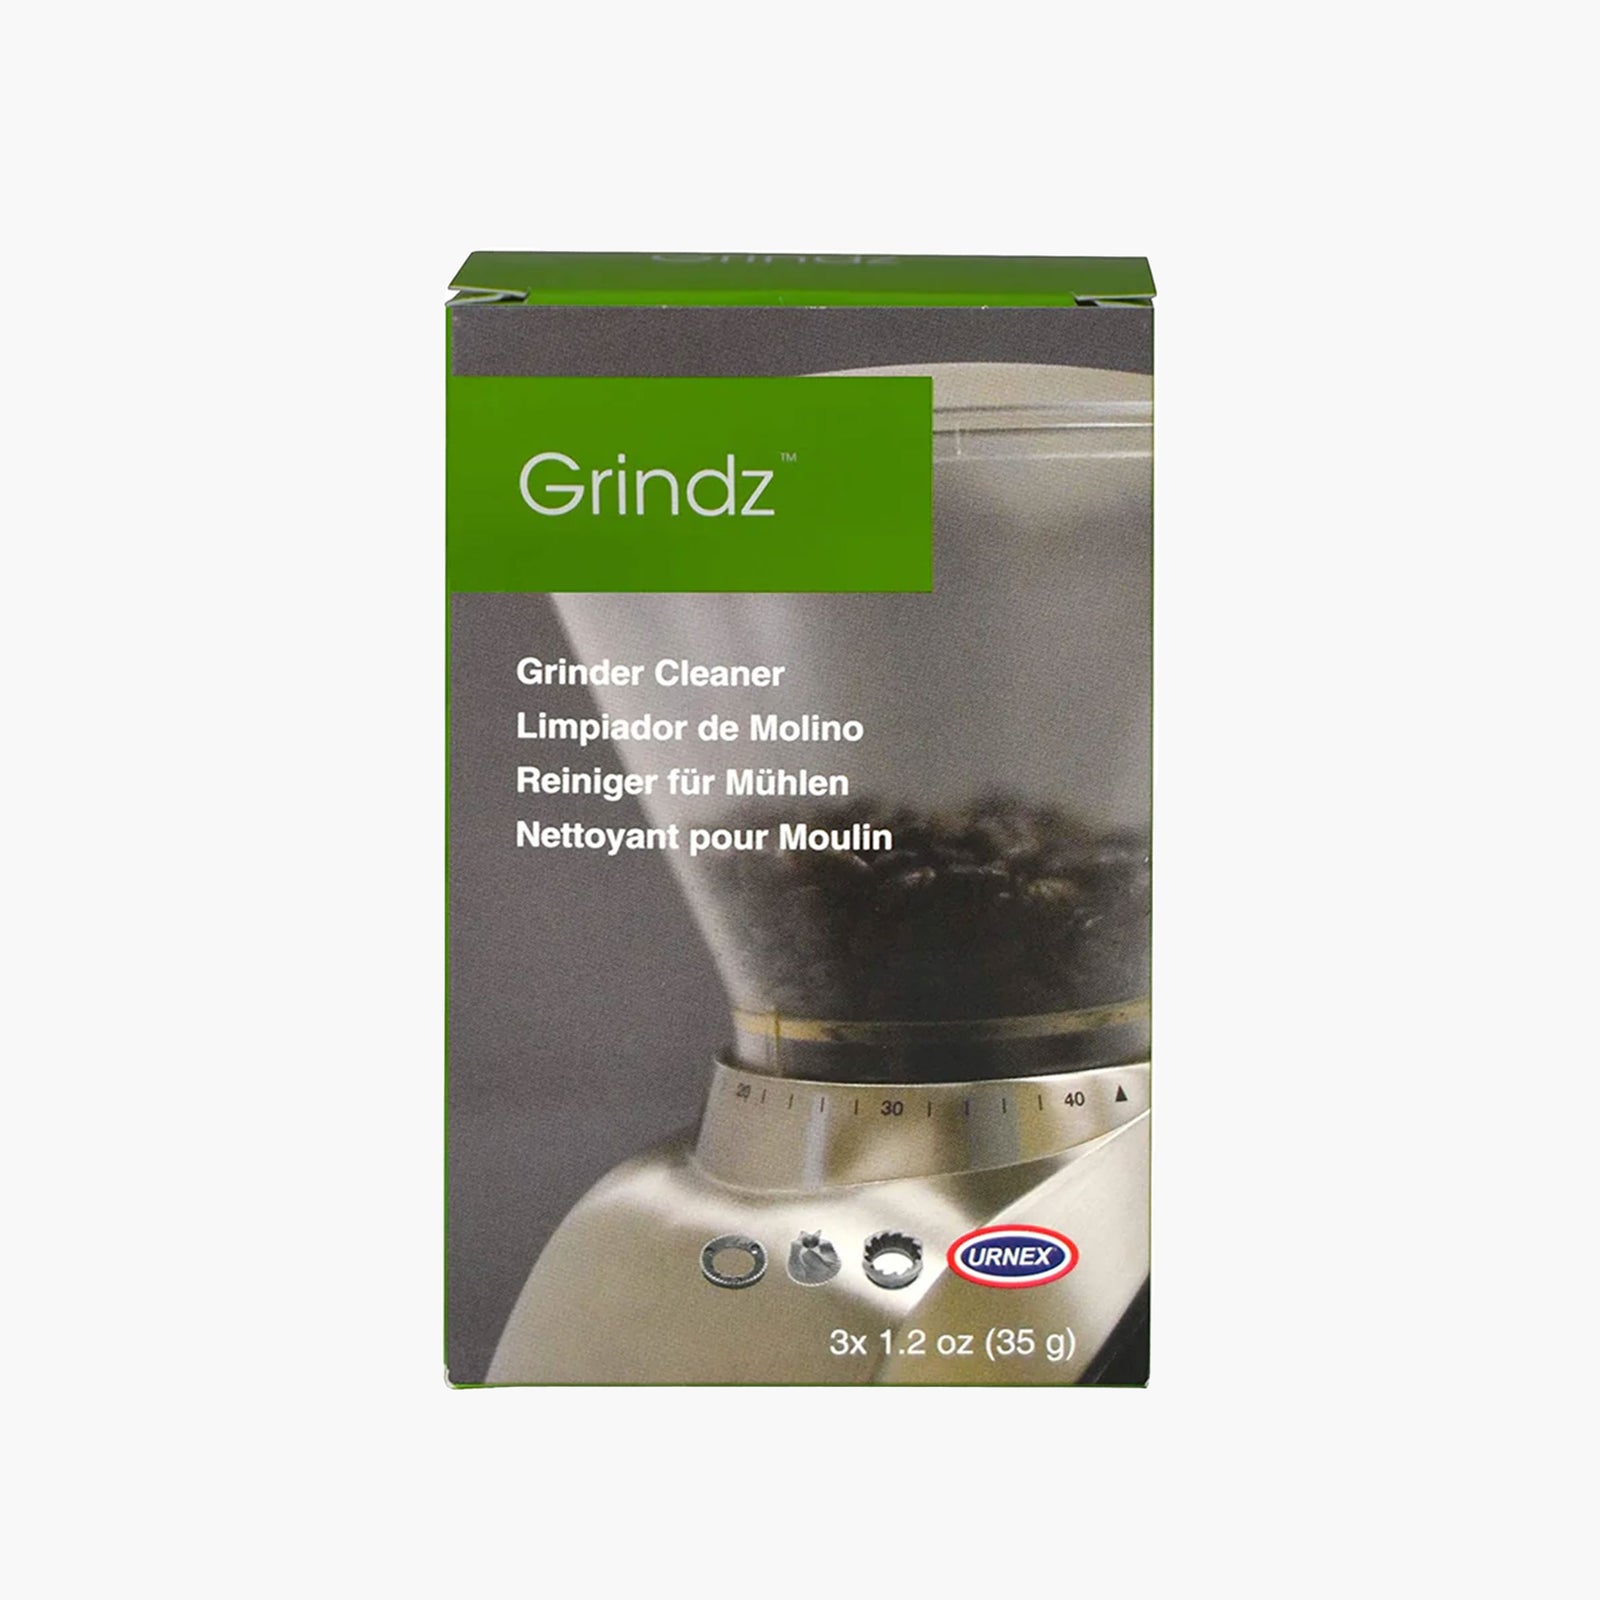 Coffee Grinder Cleaner Review - Green Farm Coffee Company